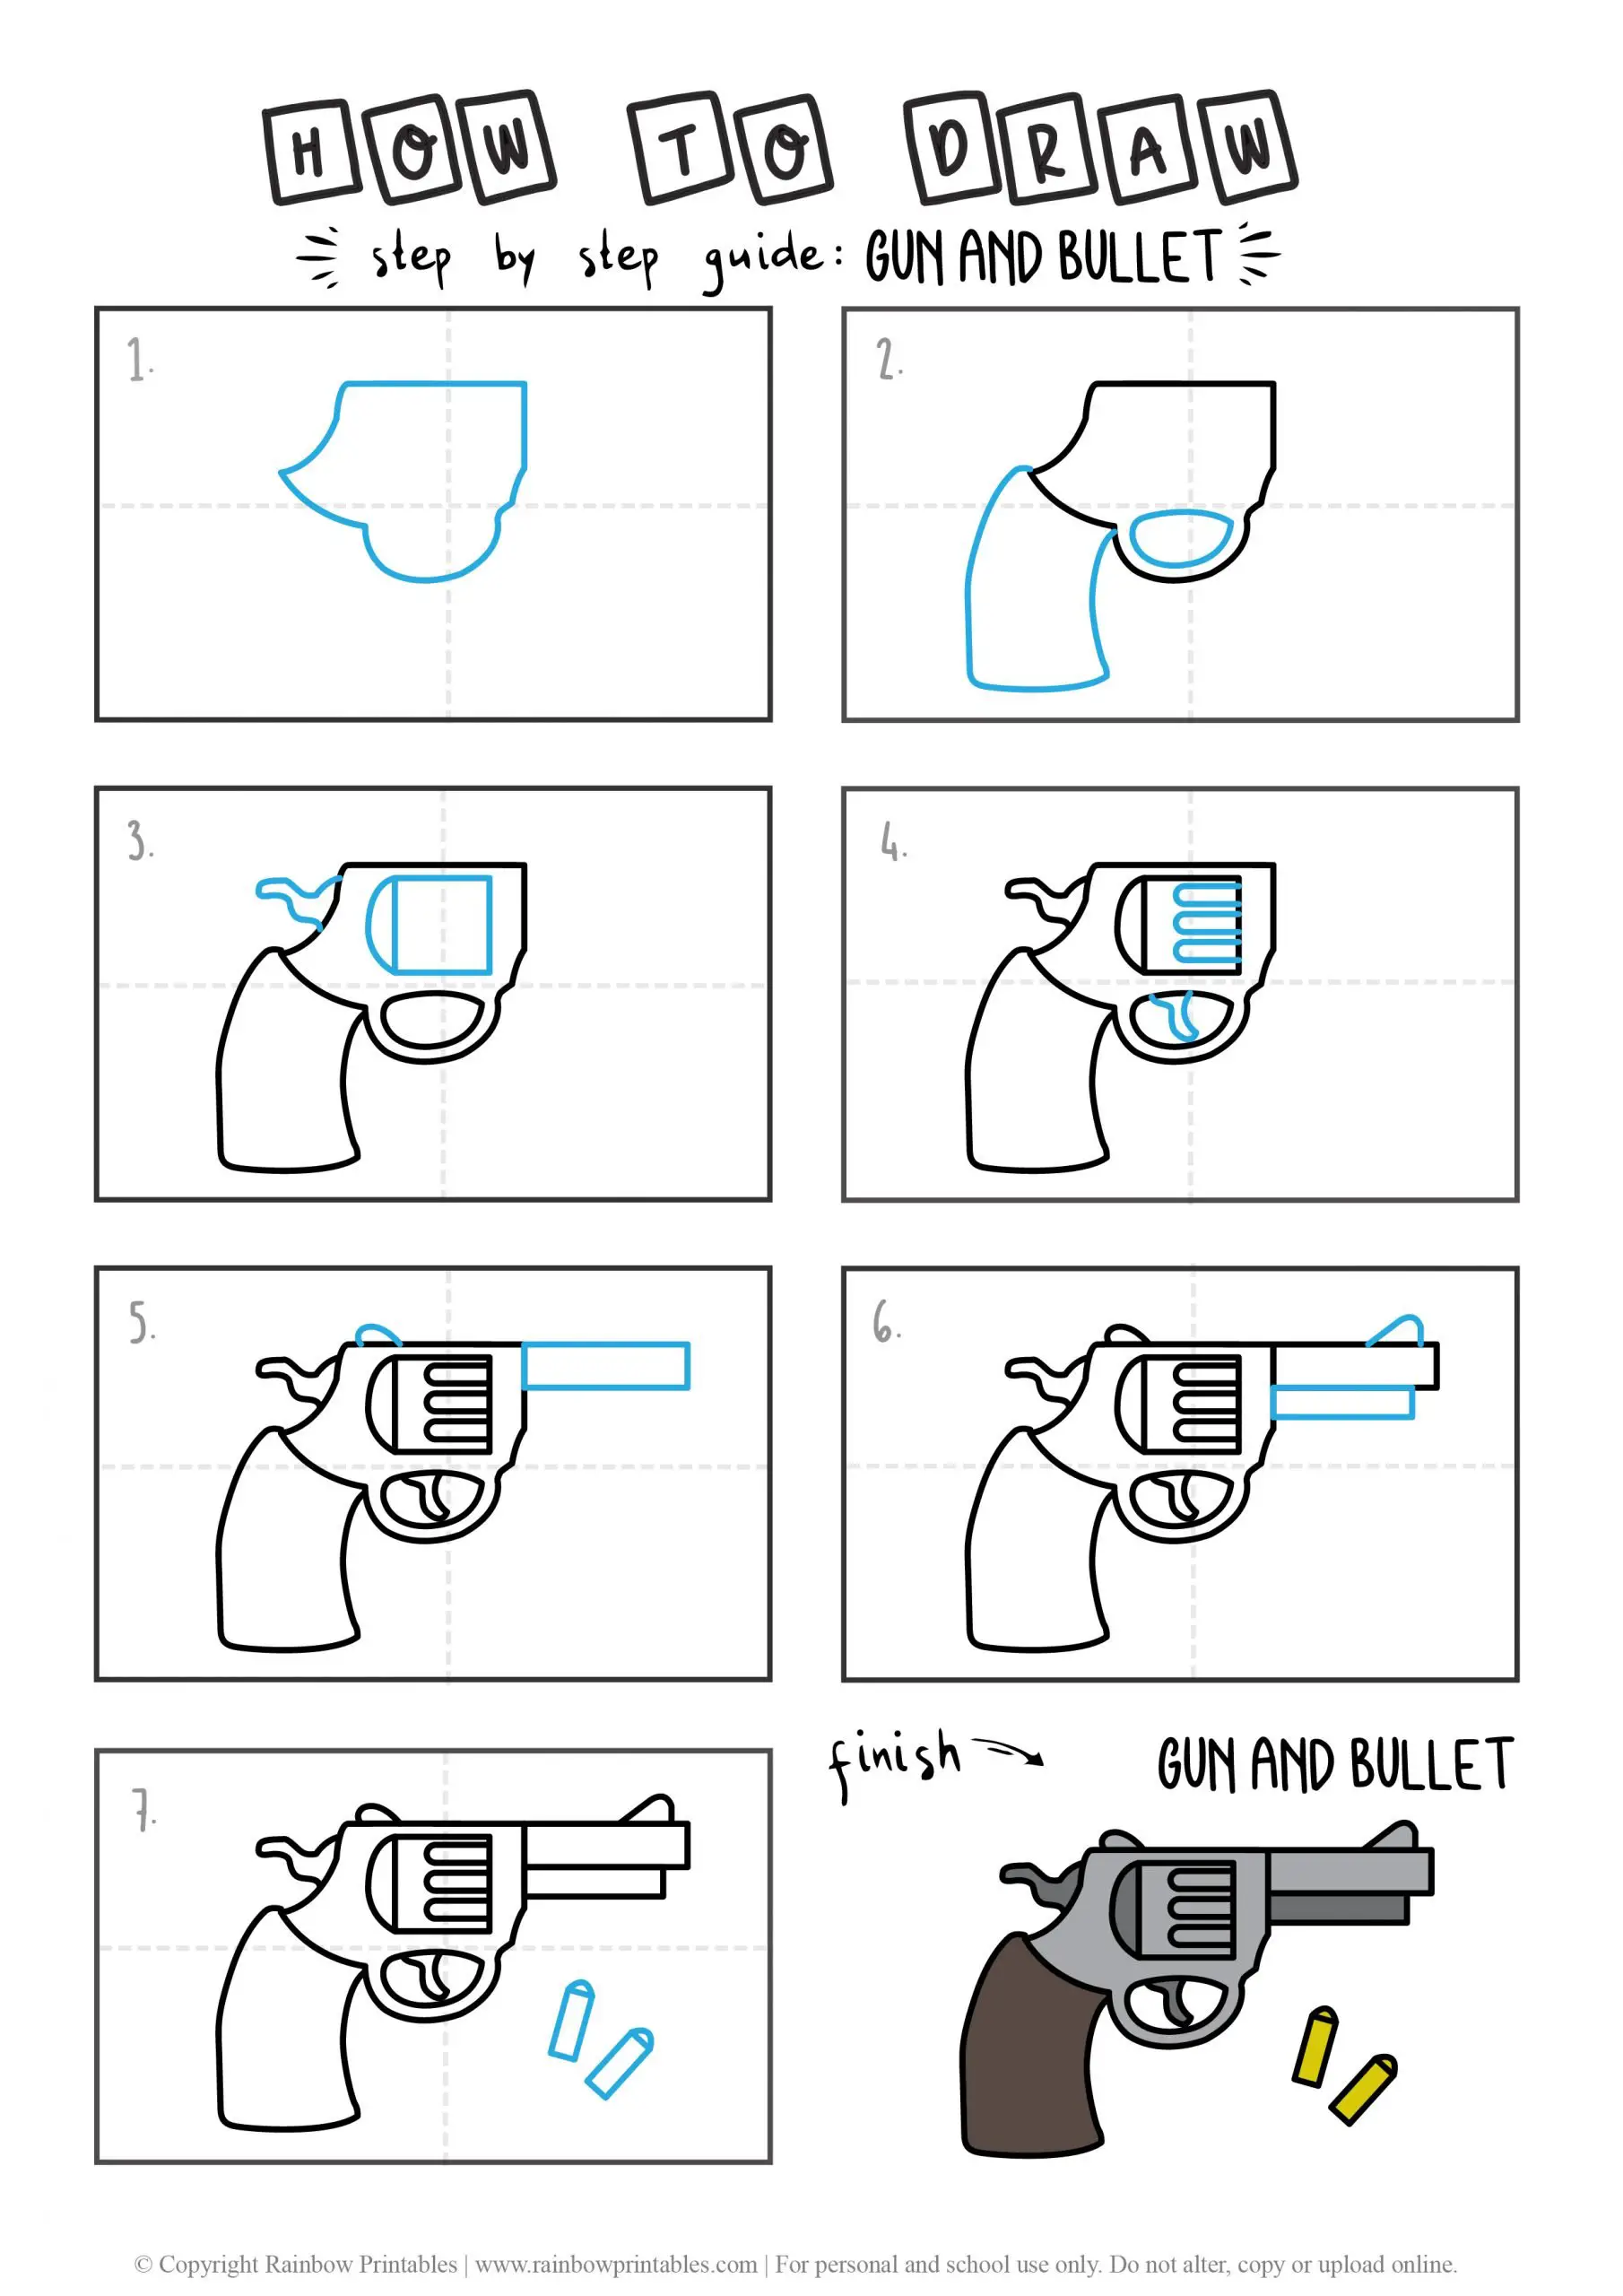 HOW TO DRAW GUN AND BULLETS ARMS WEAPON GUIDE ILLUSTRATION STEP BY STEP EASY SIMPLE FOR KIDS